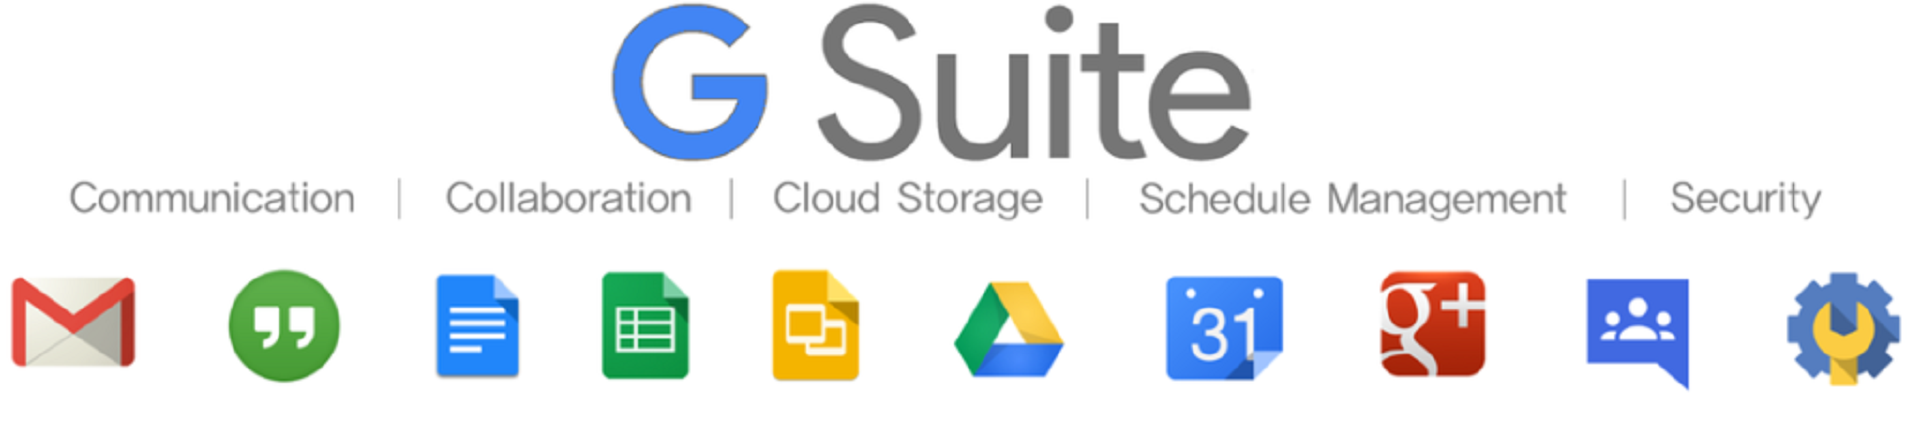 G Suite for small business